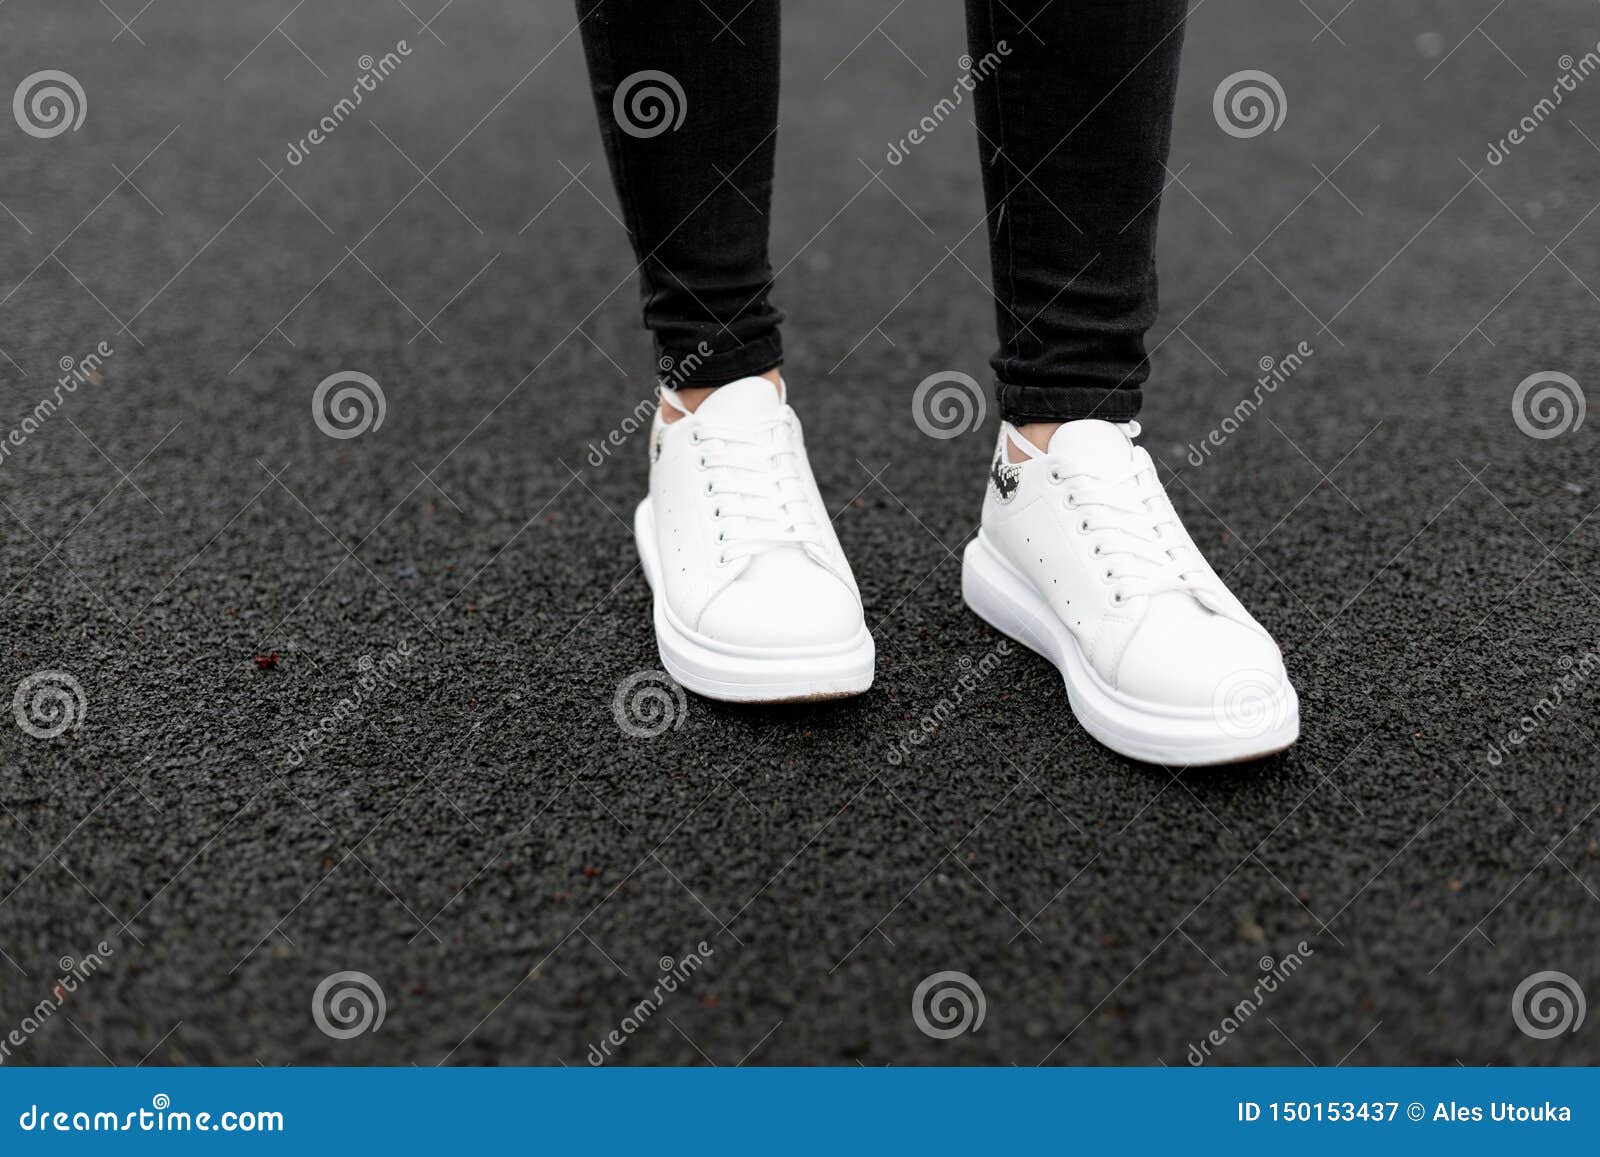 Women`s Legs in Black Jeans in Fashionable White Leather Sneakers Stand ...